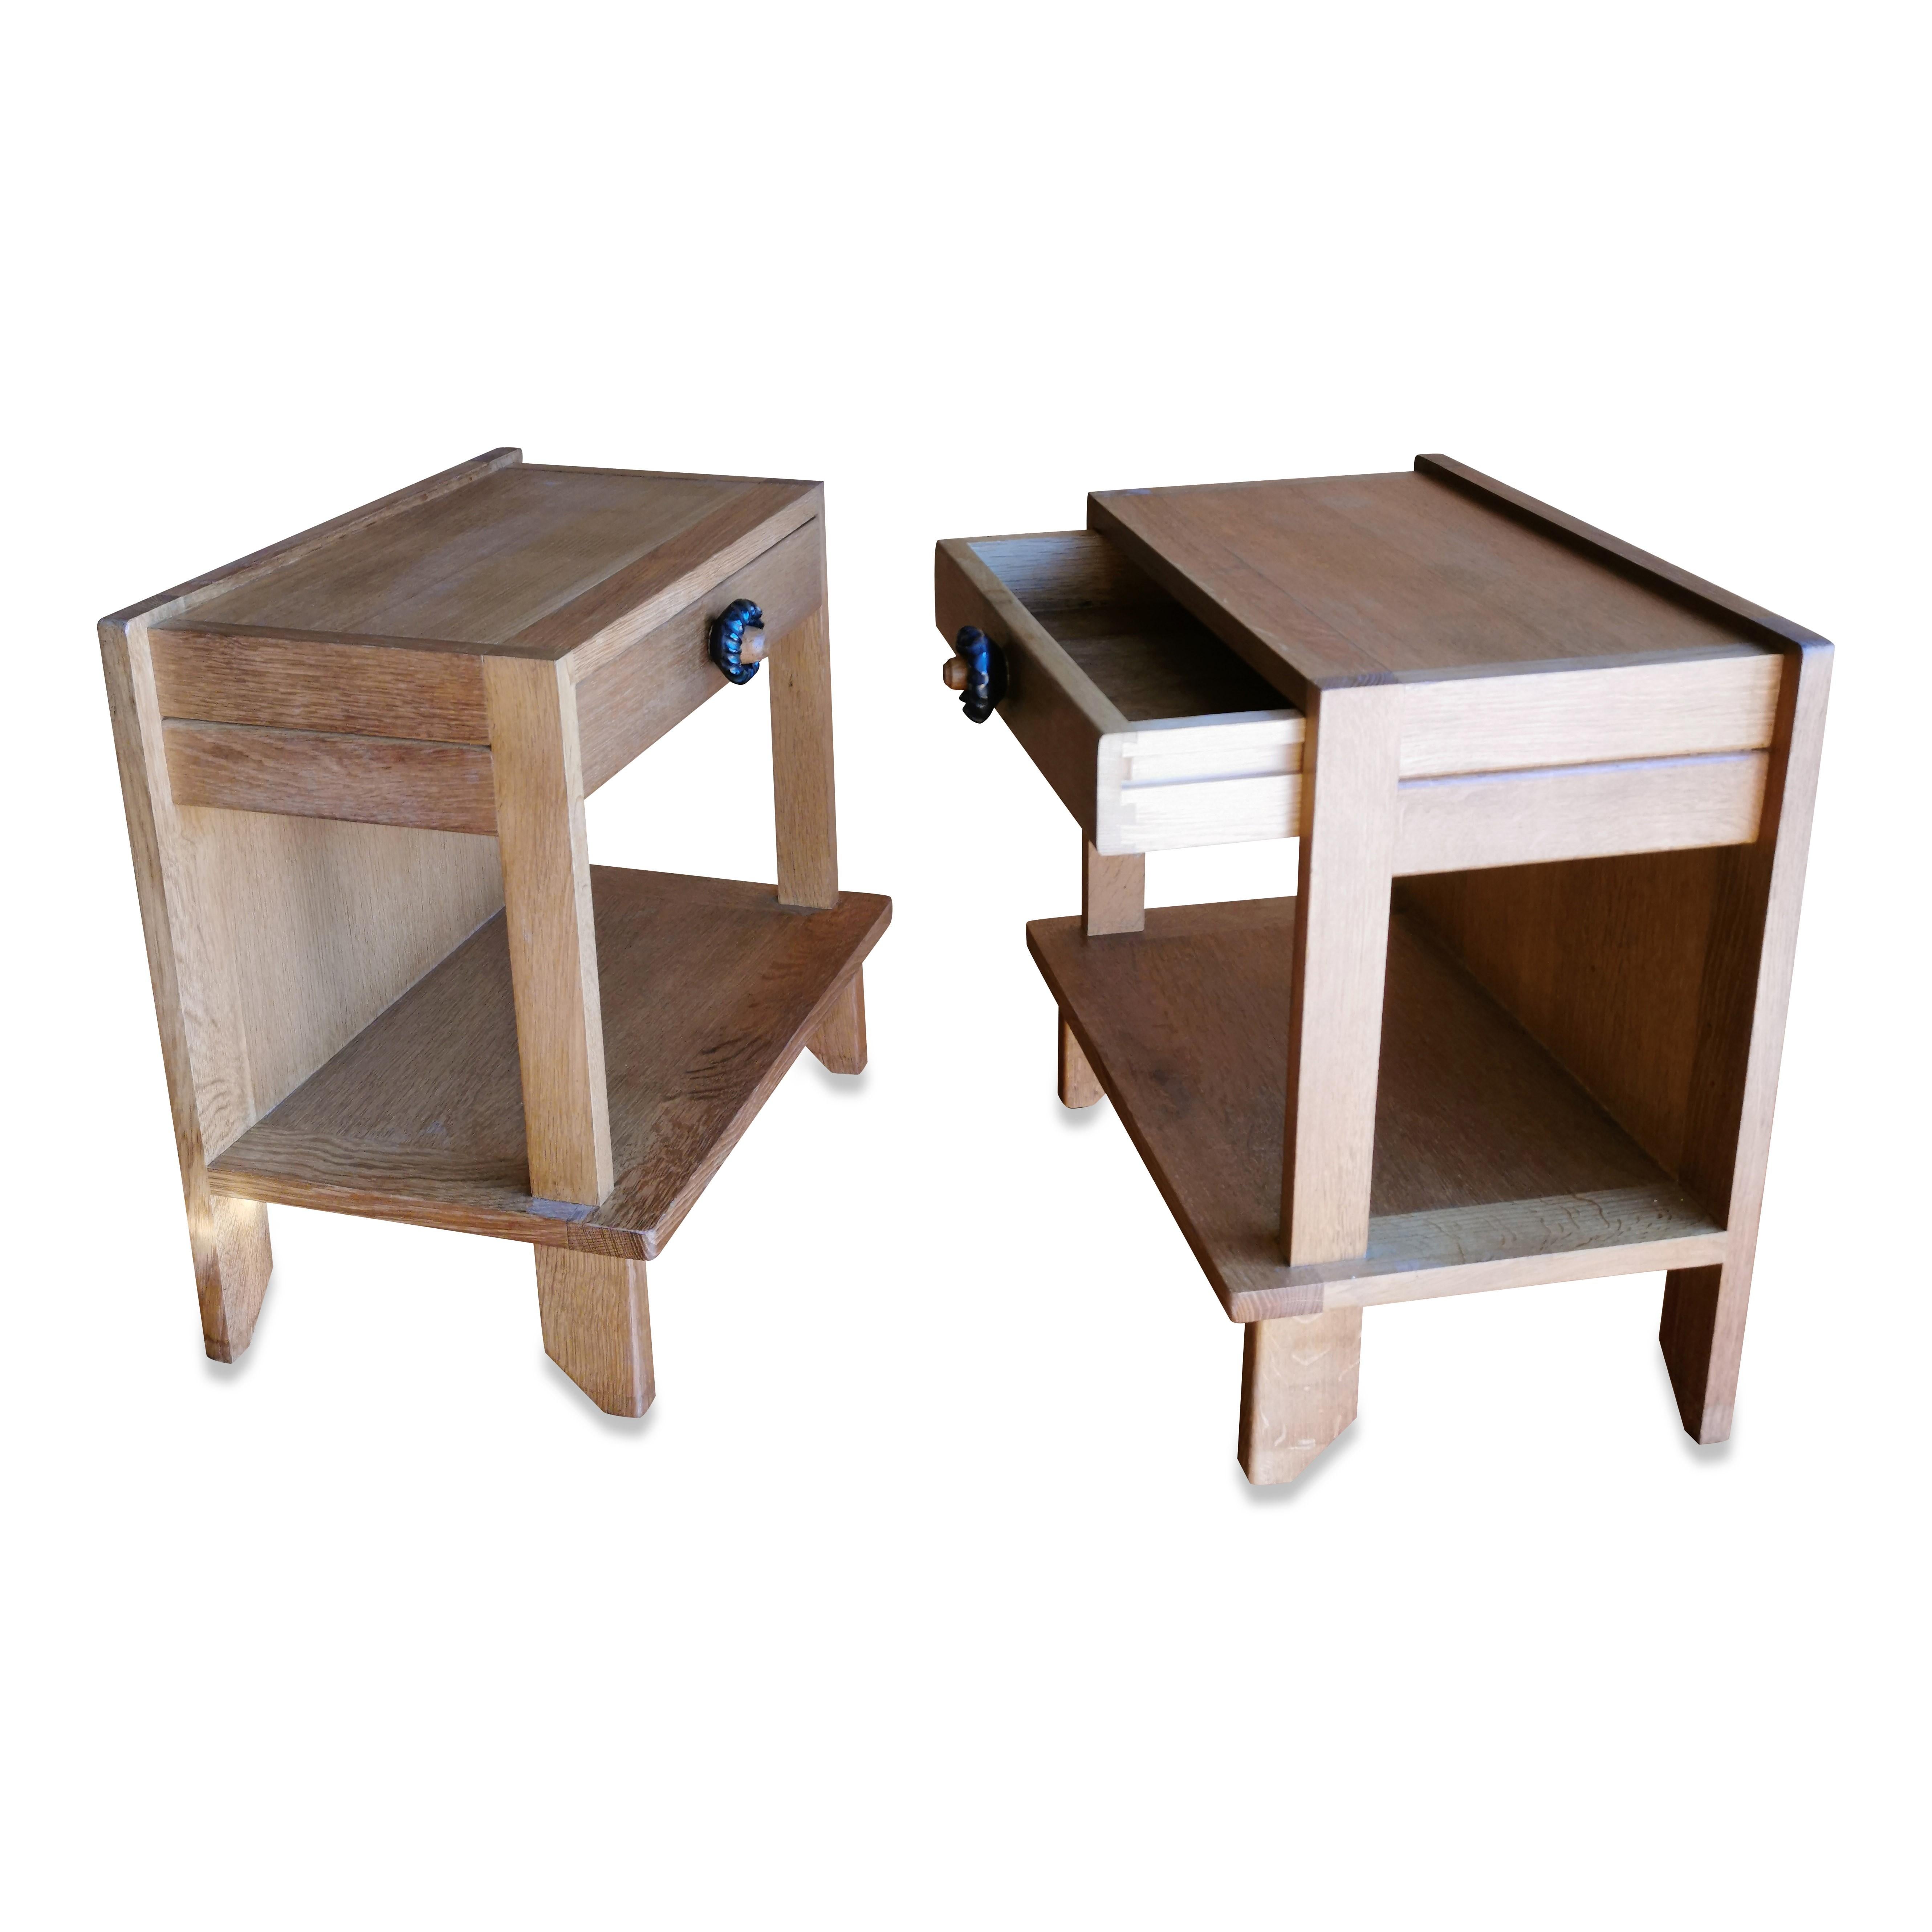 Pair of Minimalist Nightstands by Guillerme & Chambron, France, 1970s (Keramik)